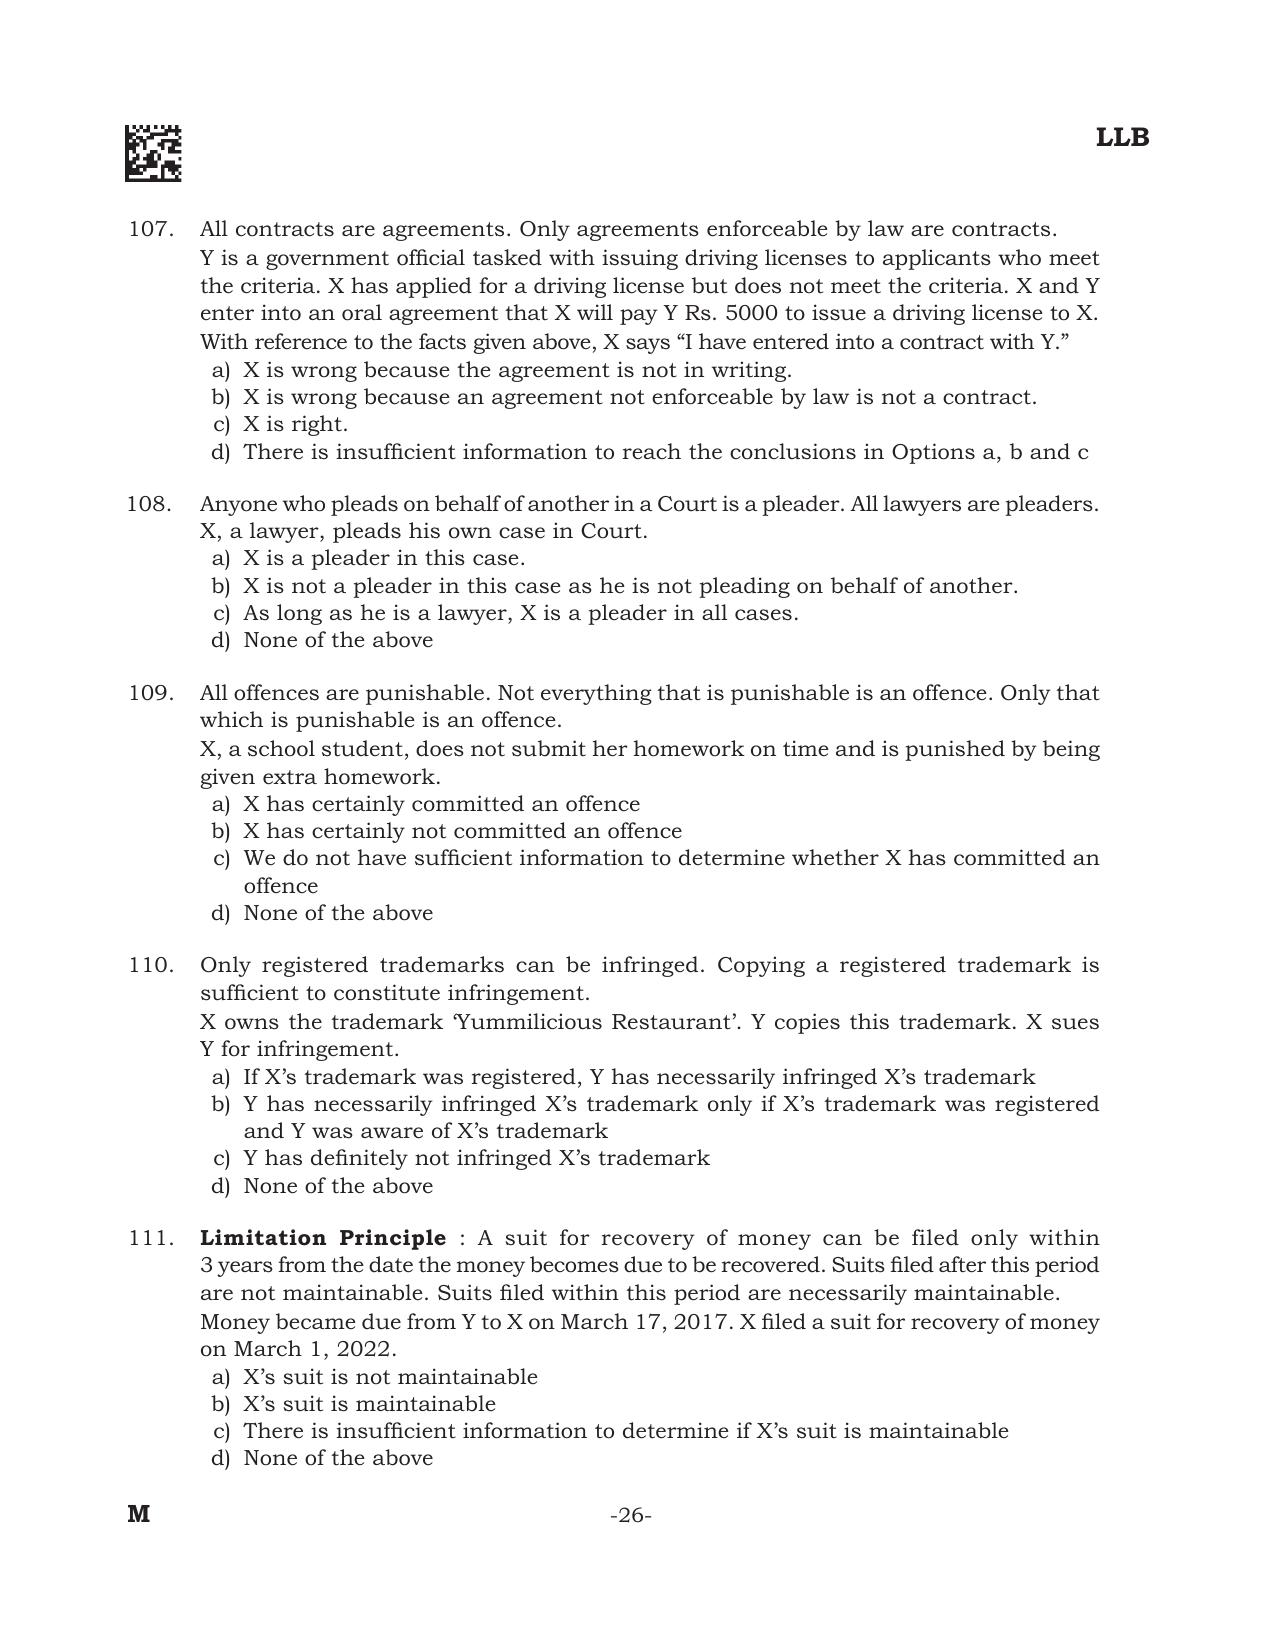 AILET 2022 Question Paper for BA LLB - Page 26